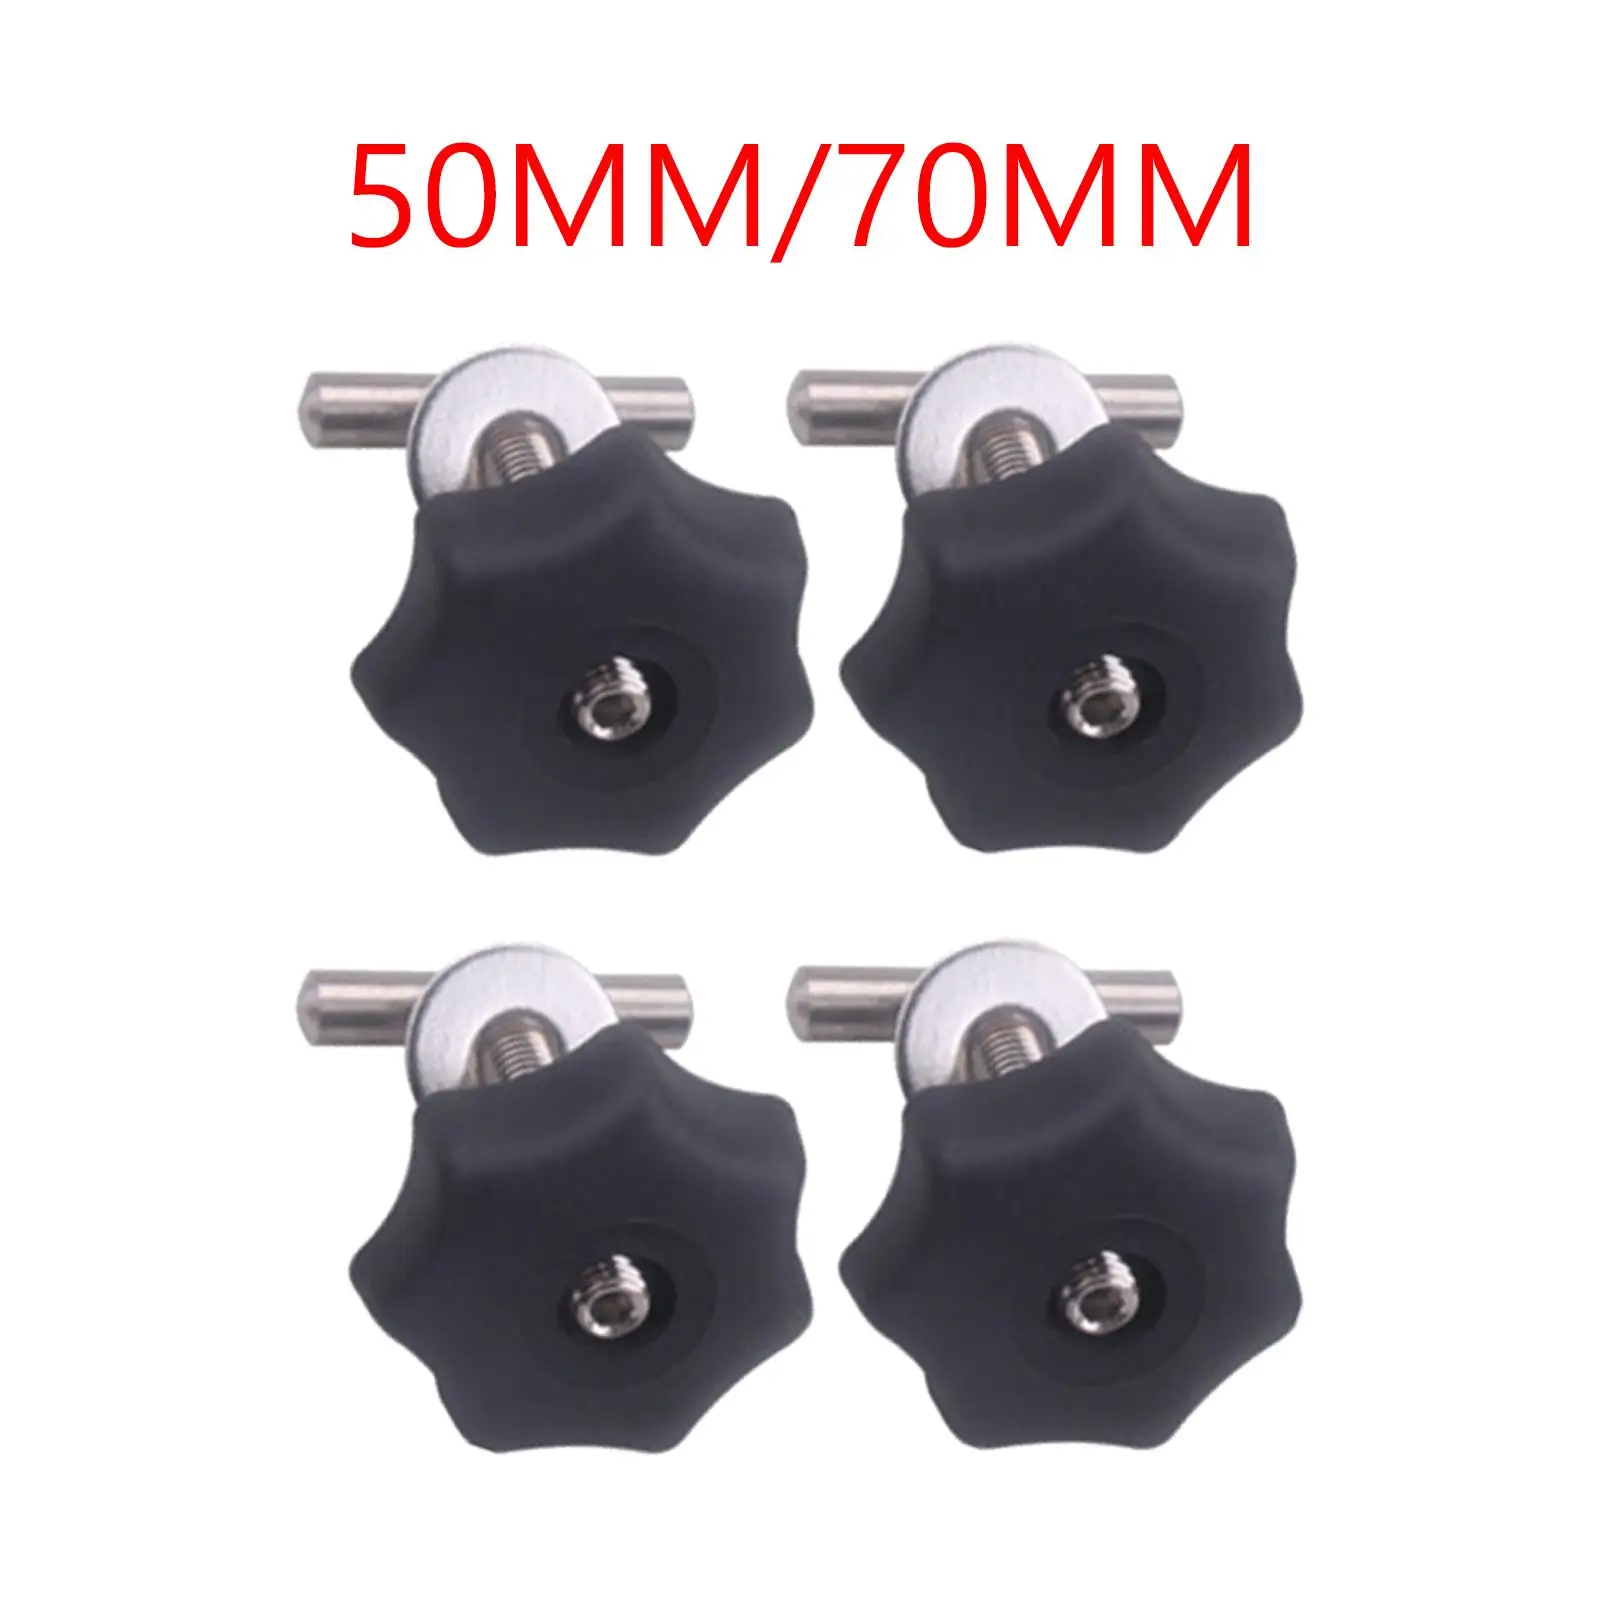 4pcs Locking Rail Bolts Mounting Bolts Solid Nut Set Durable 50mm/70mm for T5